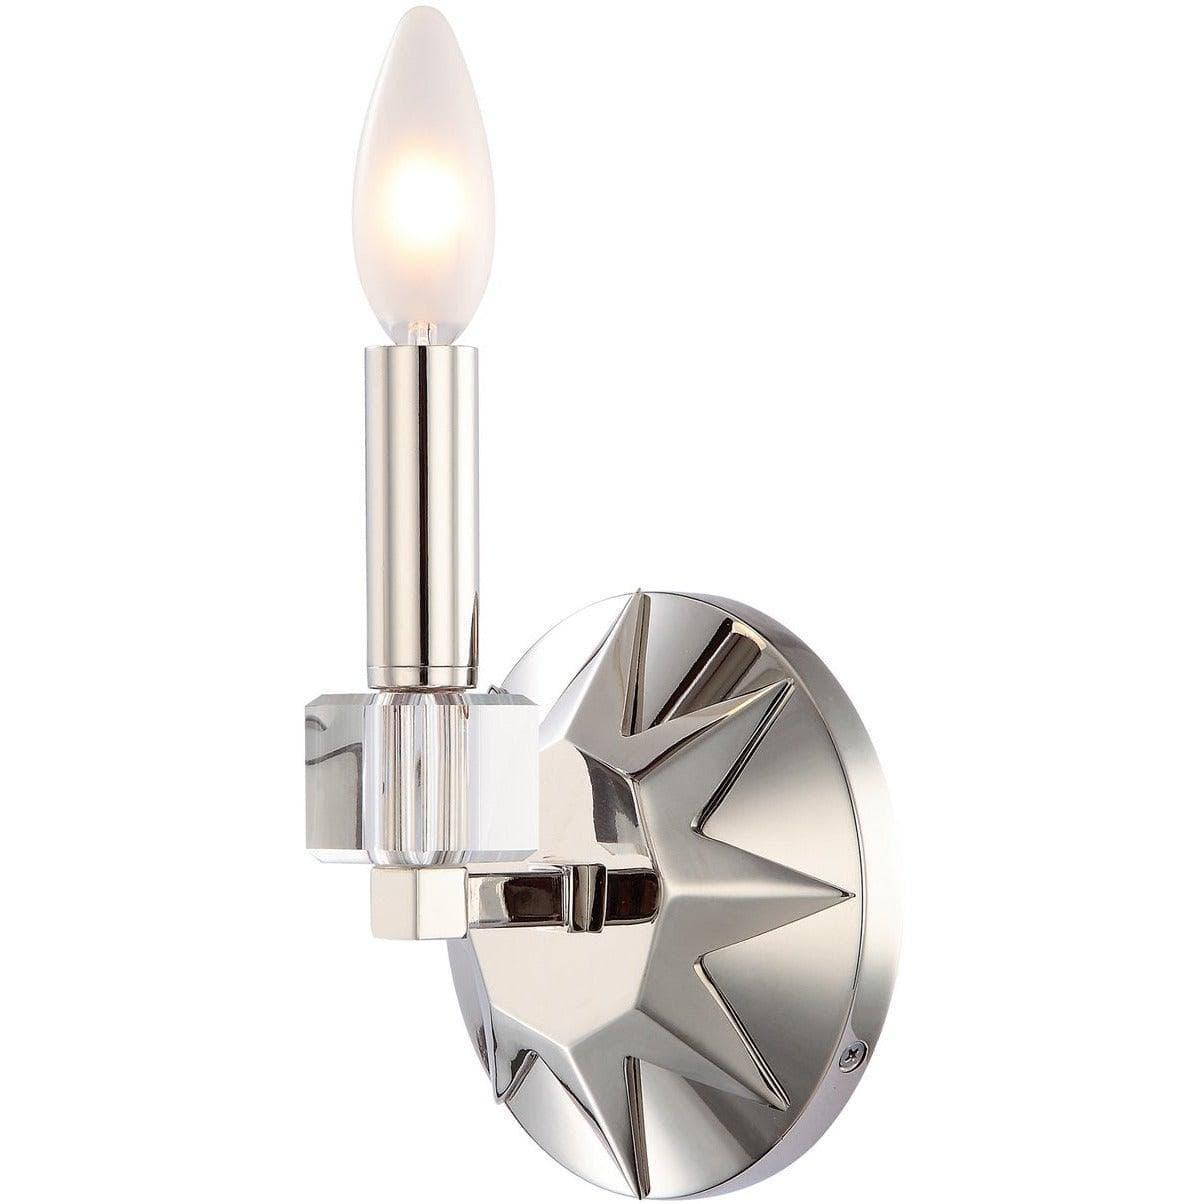 Montreal Lighting & Hardware - Carson One Light Wall Mount by Crystorama | Open Box - 8851-PN-OB | Montreal Lighting & Hardware